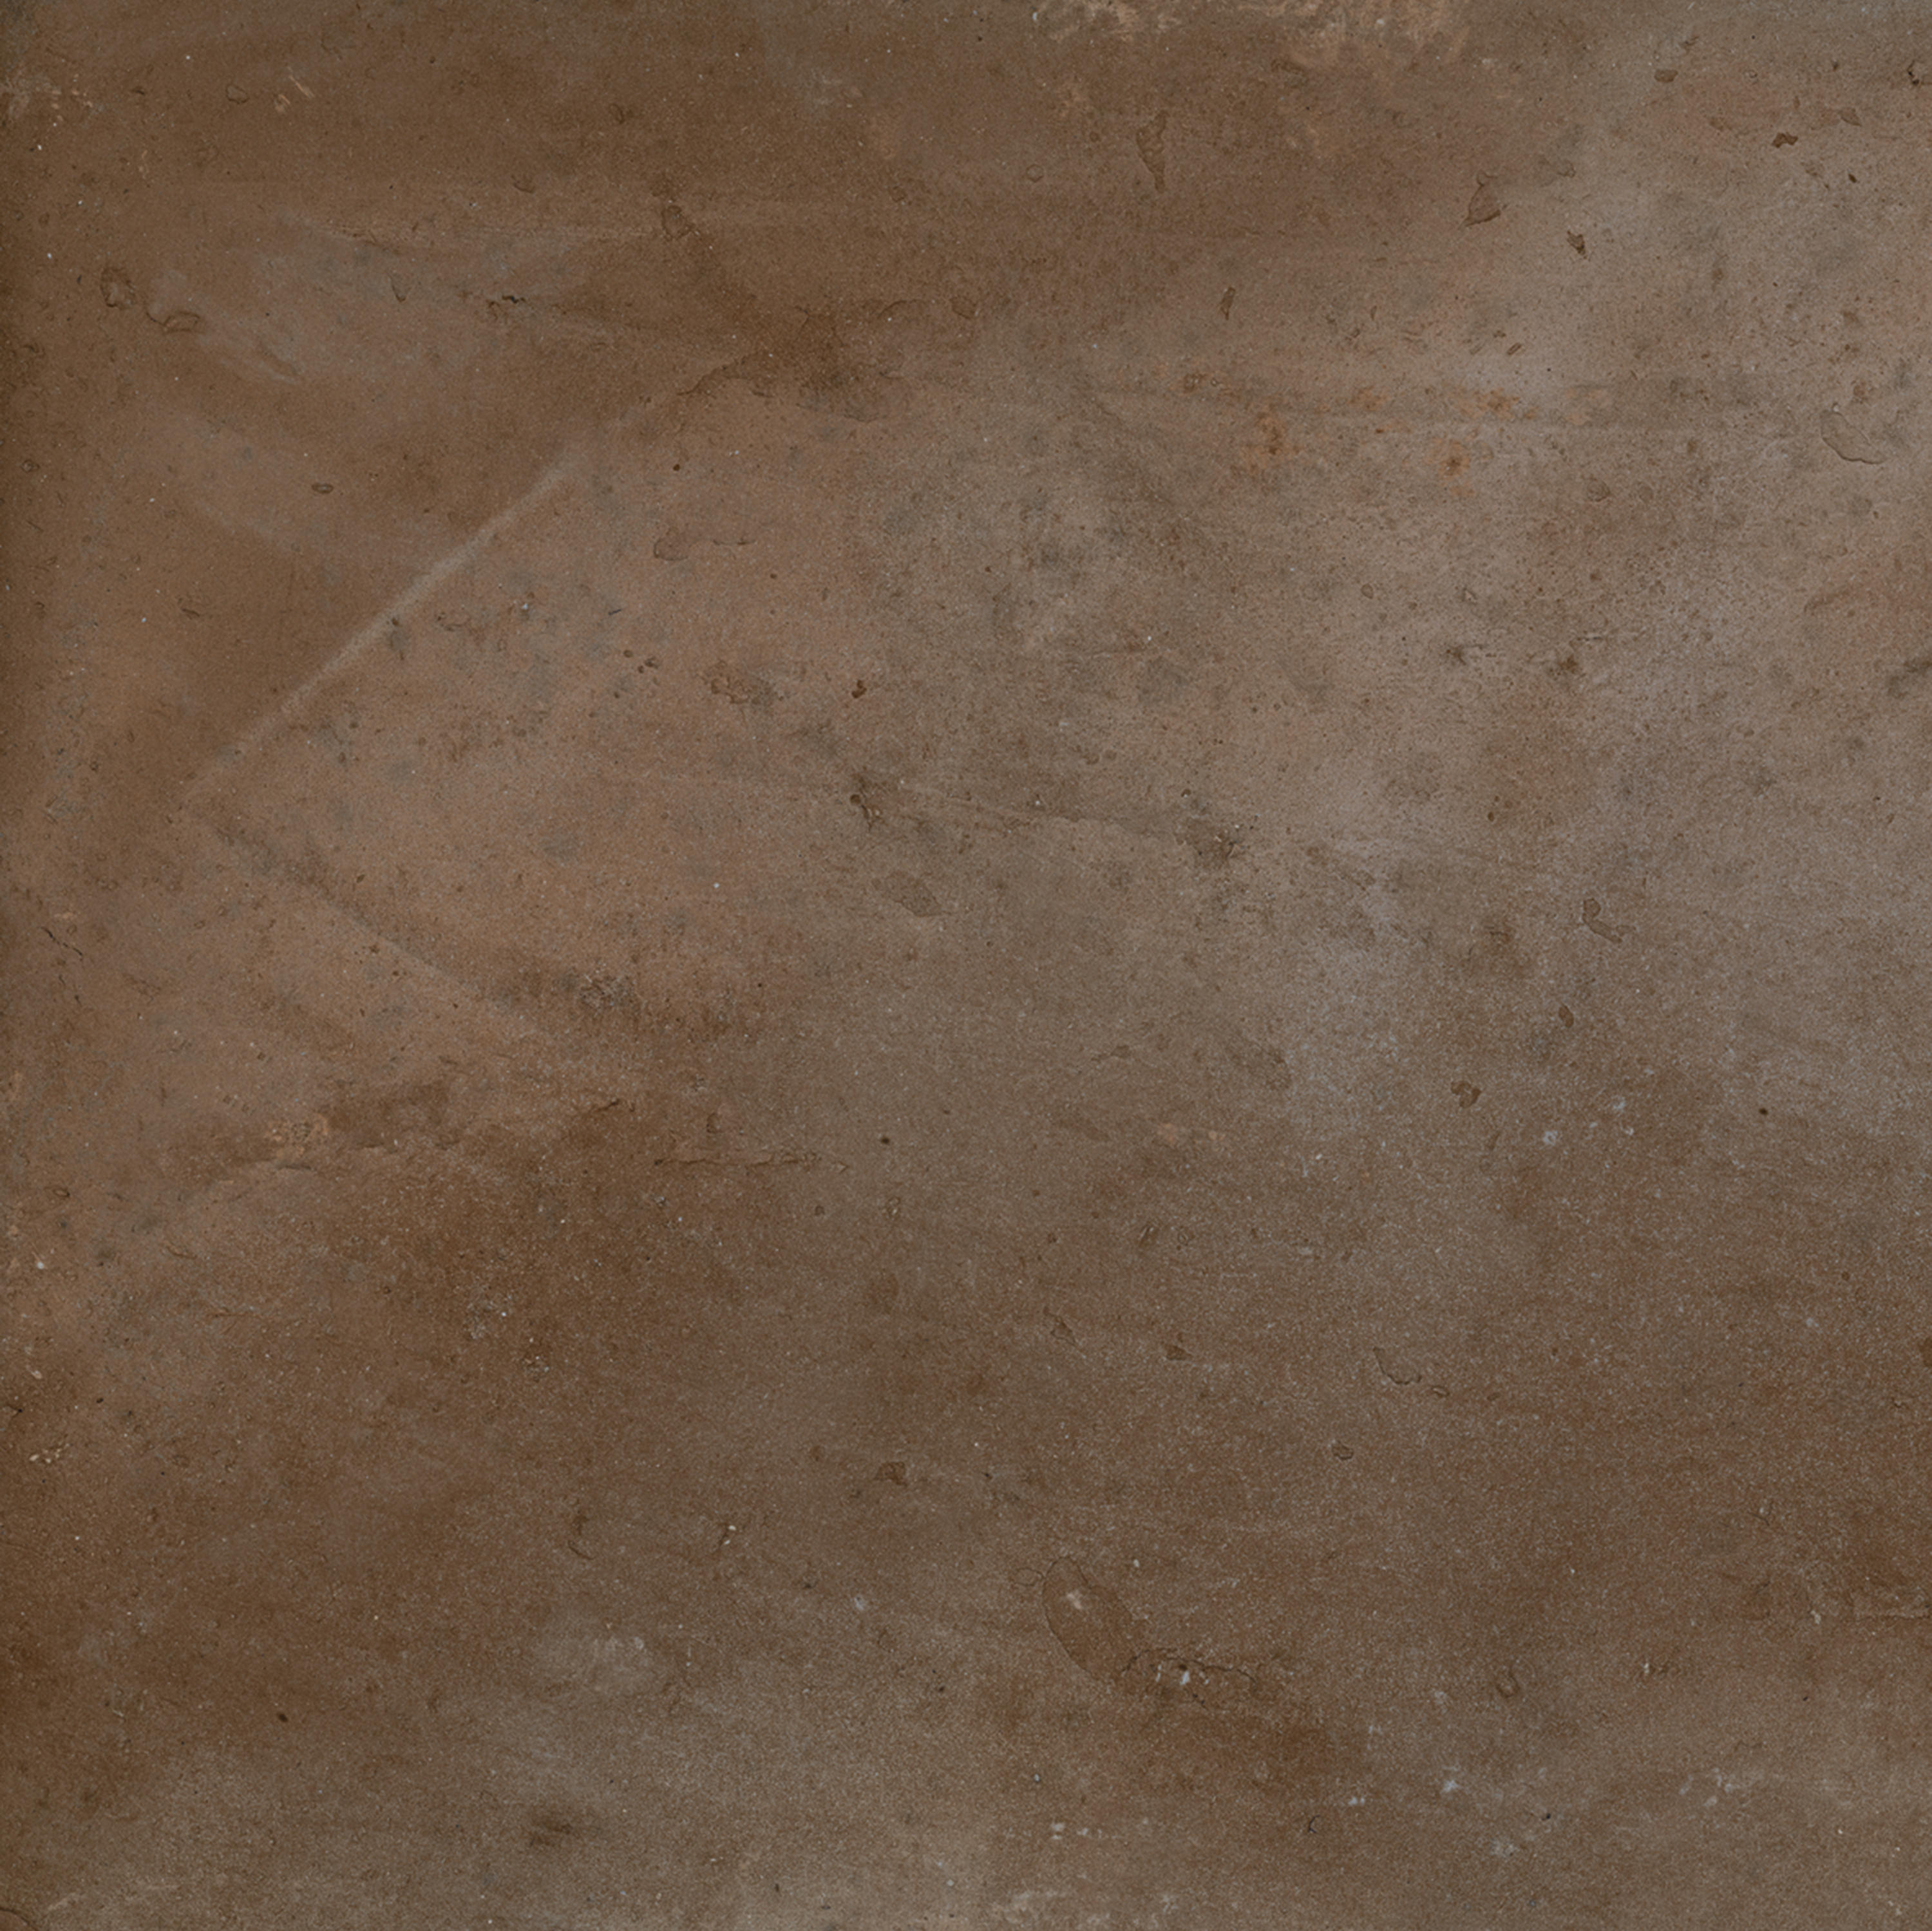 ACUSTICO 12 BROWN  Ceramic  tiles  from EMILGROUP Architonic